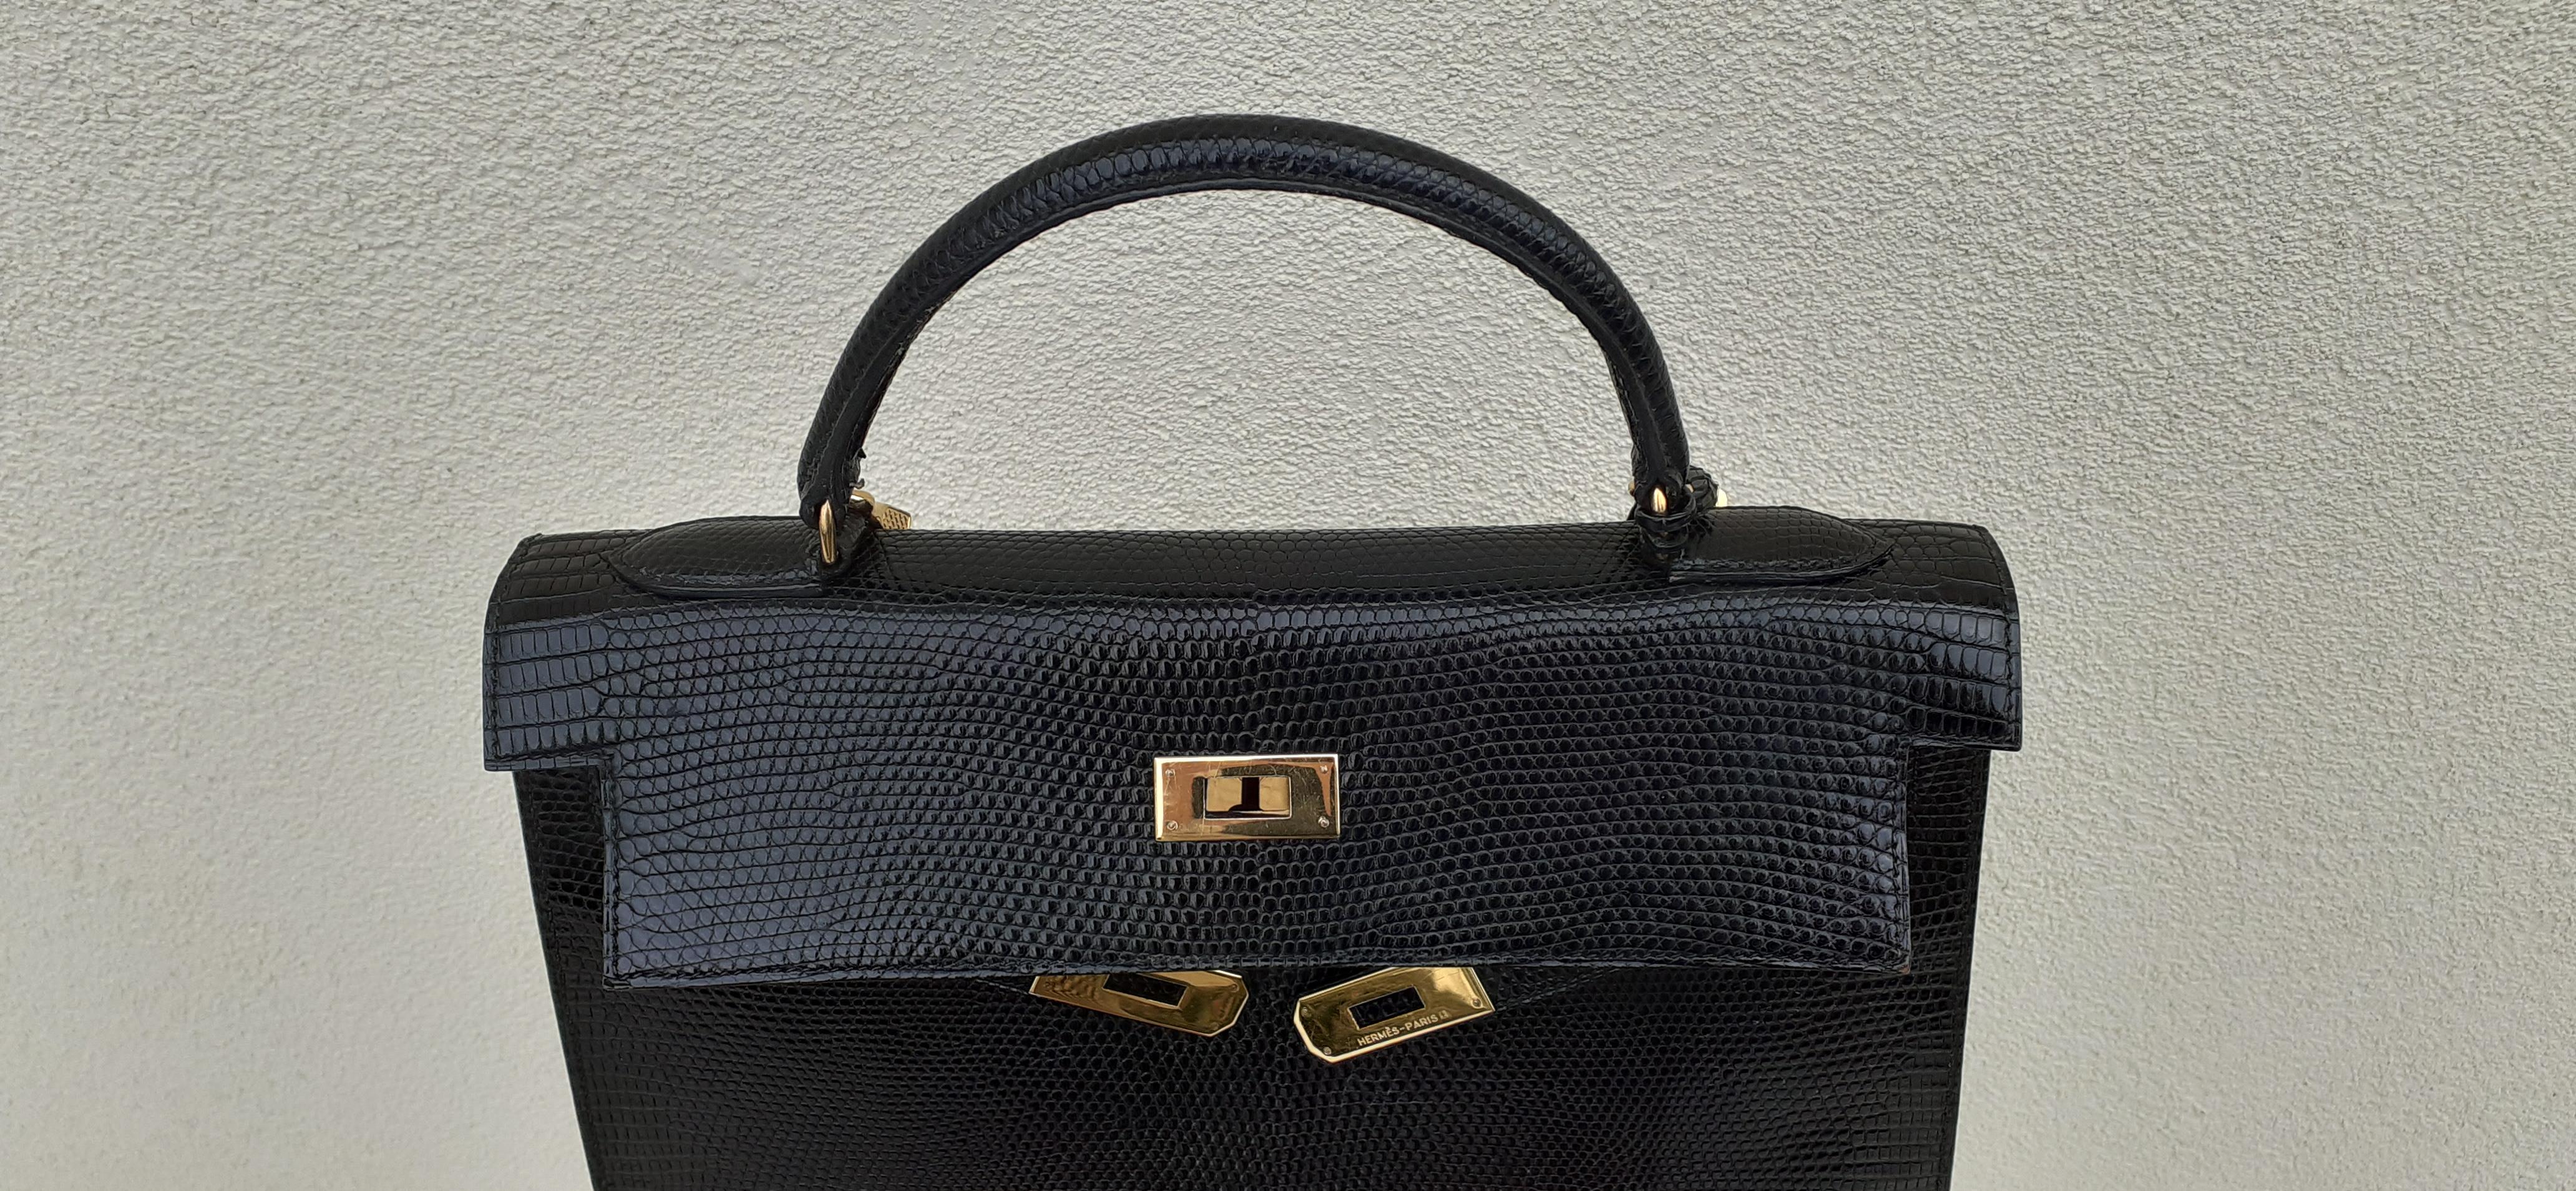 Exceptional Hermès Sellier Kelly Bag Black Lizard and Golden Hdw RARE For Sale 2